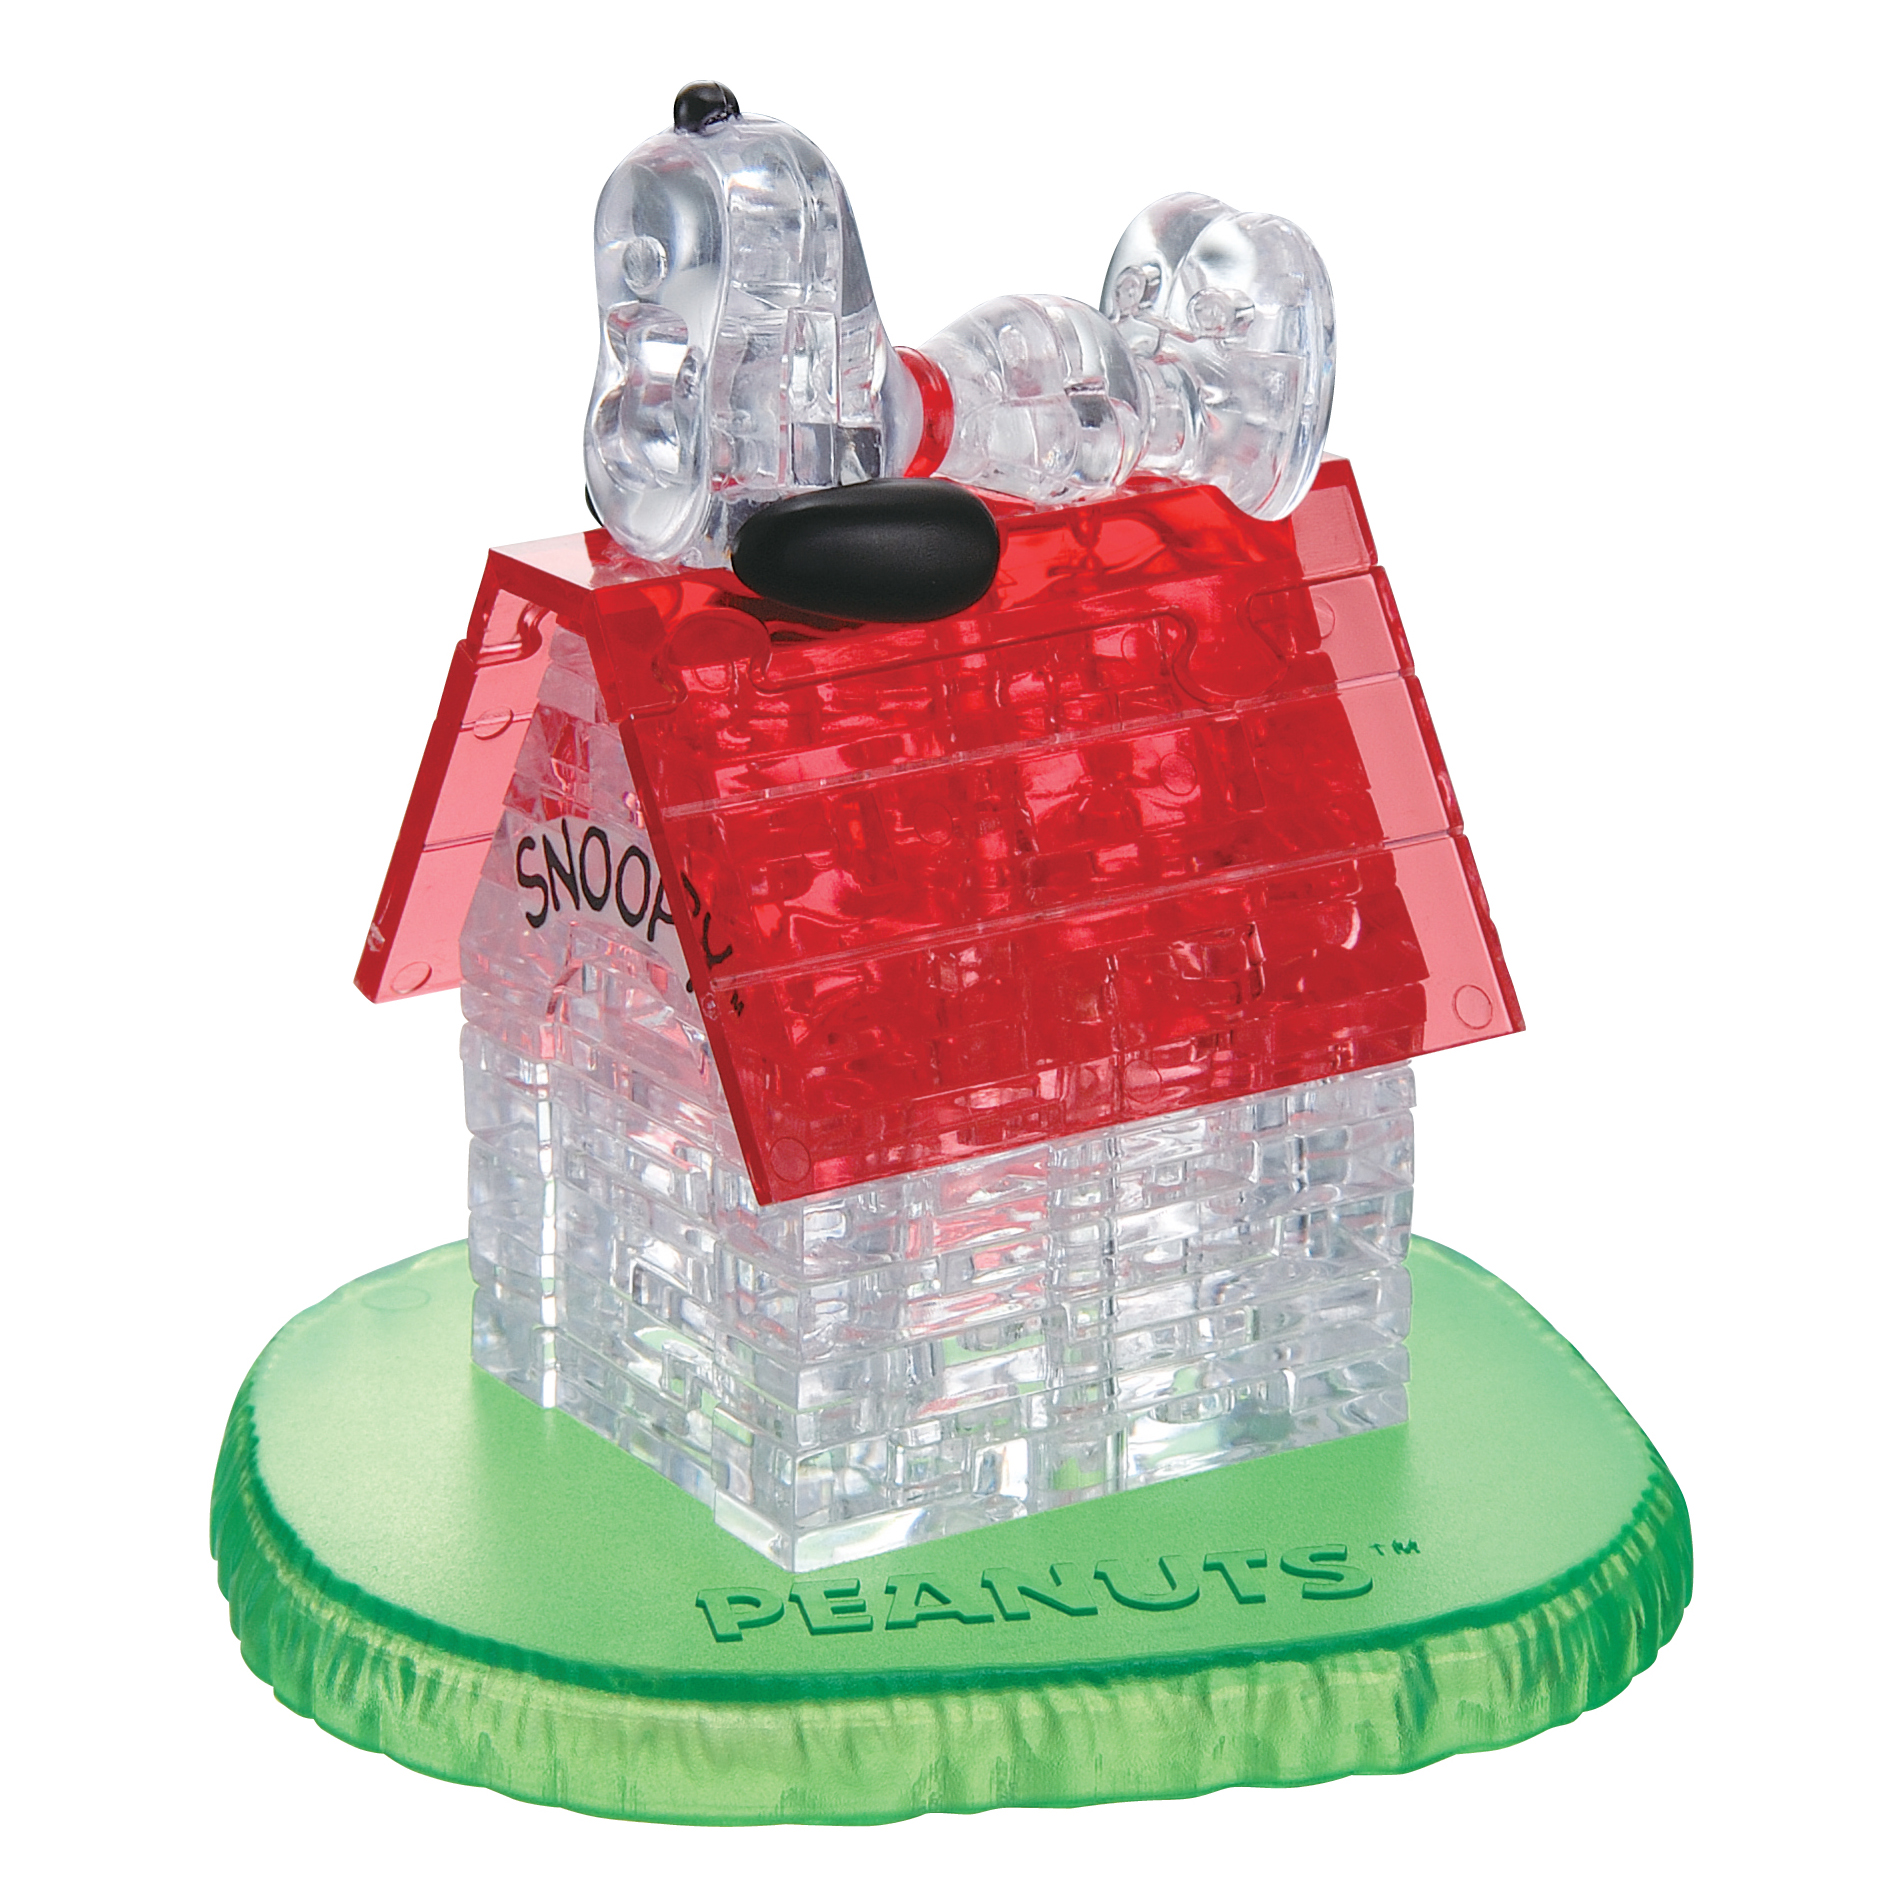 Bepuzzled 3D Crystal Puzzle - Snoopy House: 50 Pcs